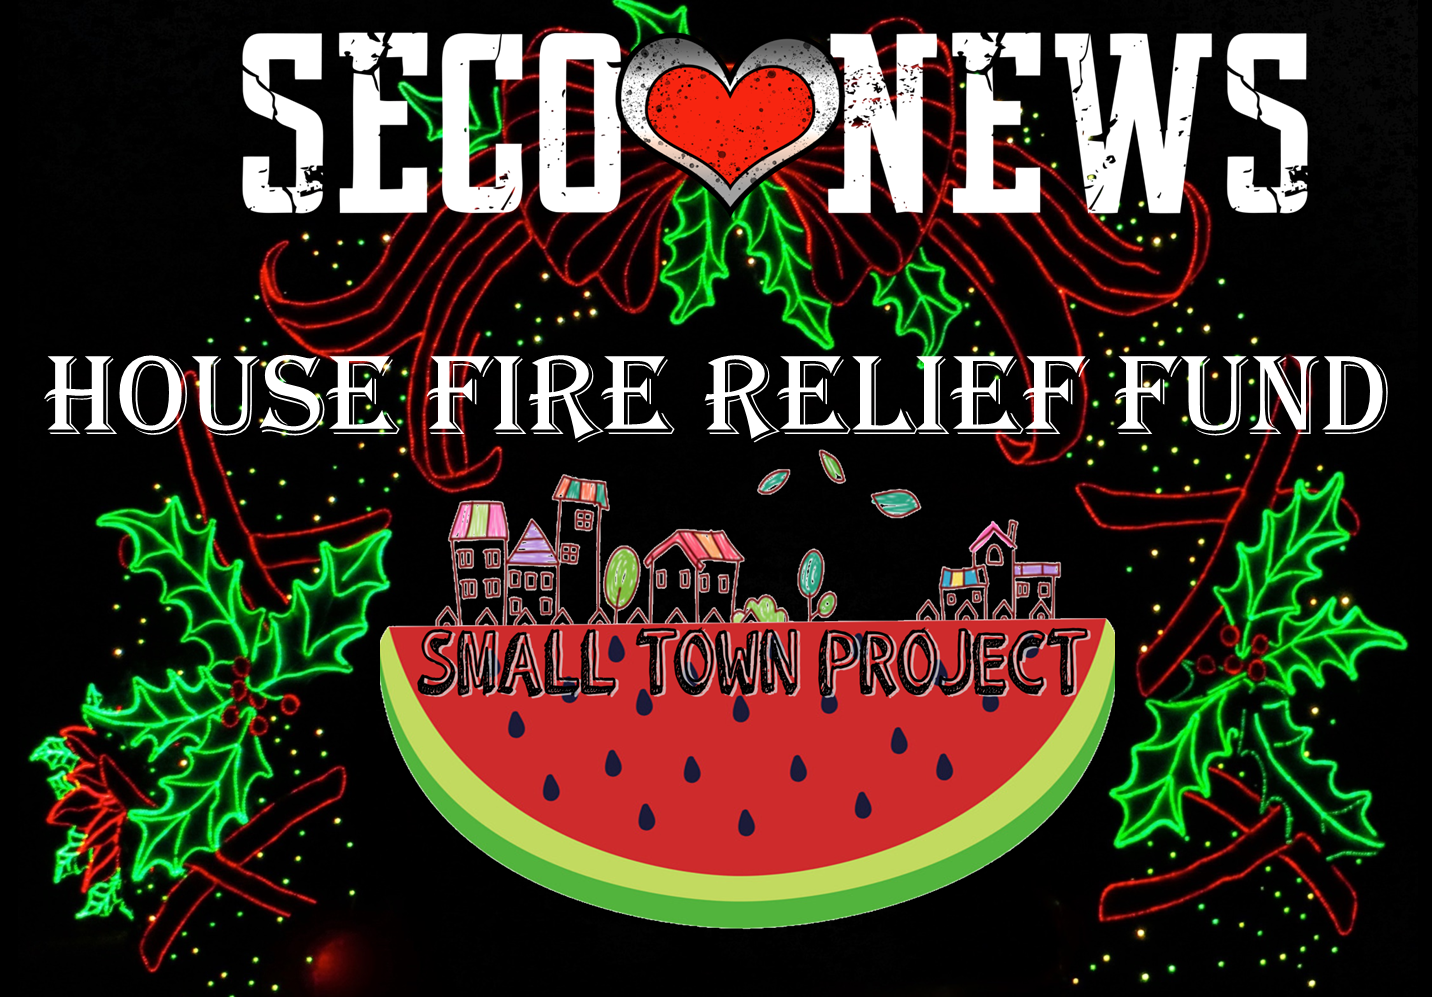 Small Town Project Fire Relief Fund SECO News seconews.org